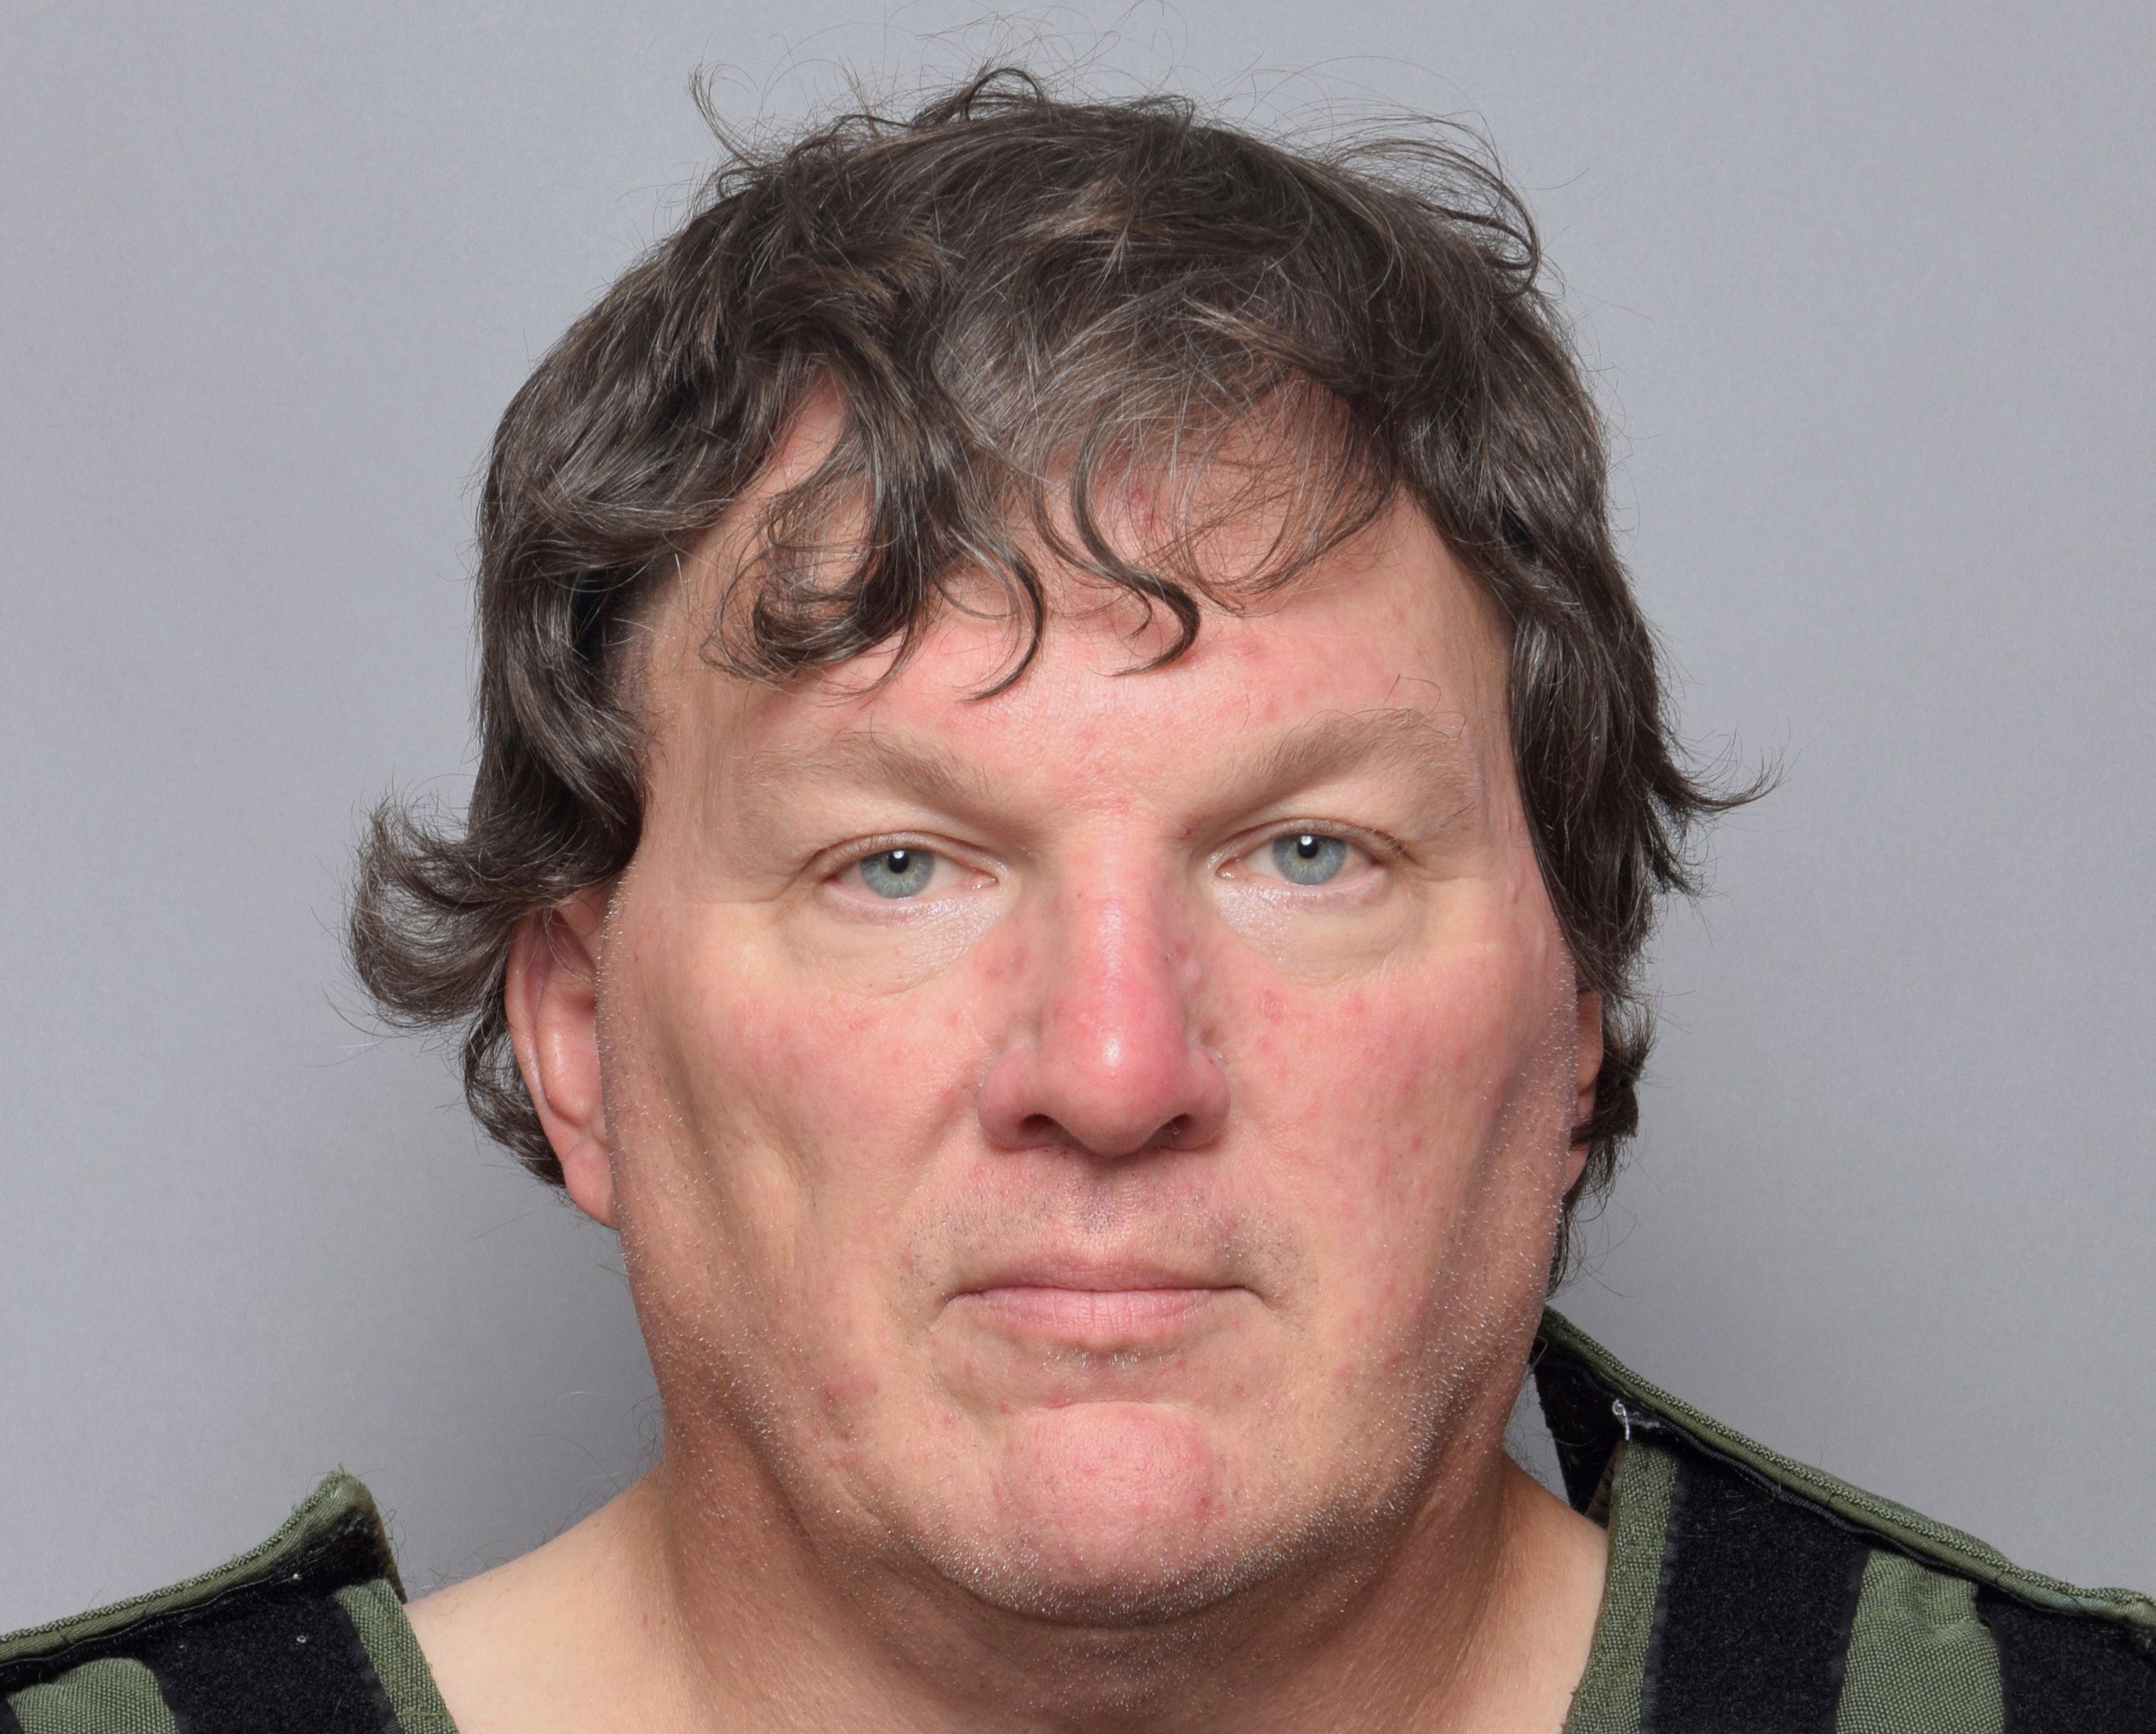 This booking image provided by Suffolk County Sheriffâs Office, shows Rex Heuermann, a Long Island architect who was charged Friday, July 14, 2023, with murder in the deaths of three of the 11 victims in a long-unsolved string of killings known as the Gilgo Beach murders.